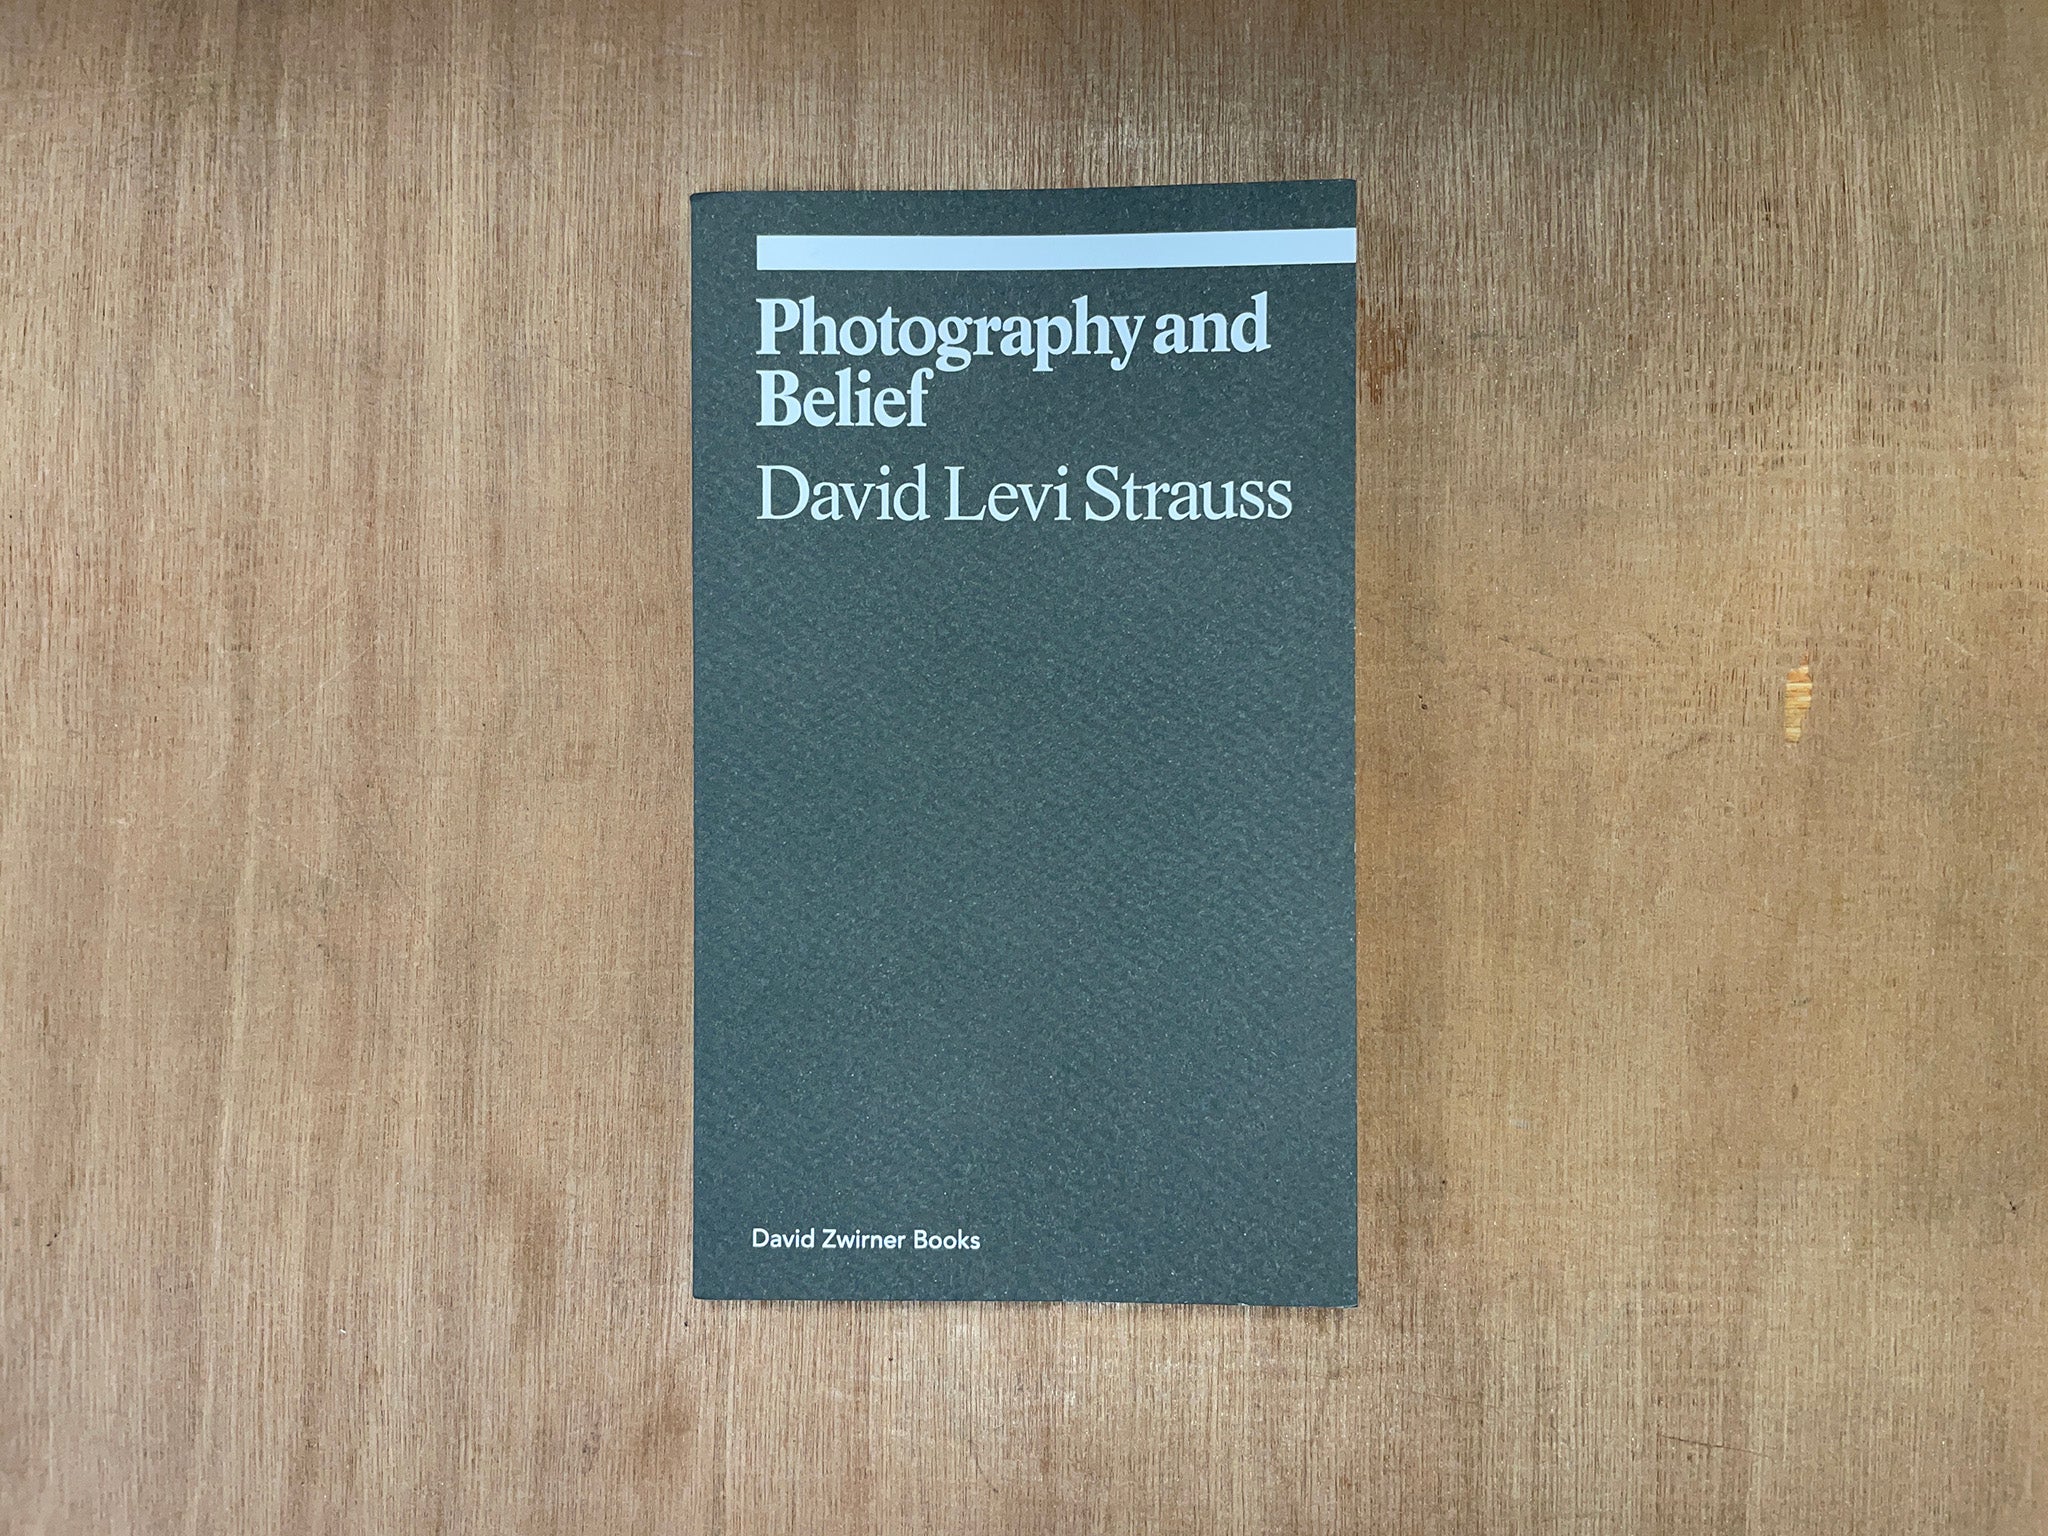 PHOTOGRAPHY AND BELIEF by David Levi Strauss